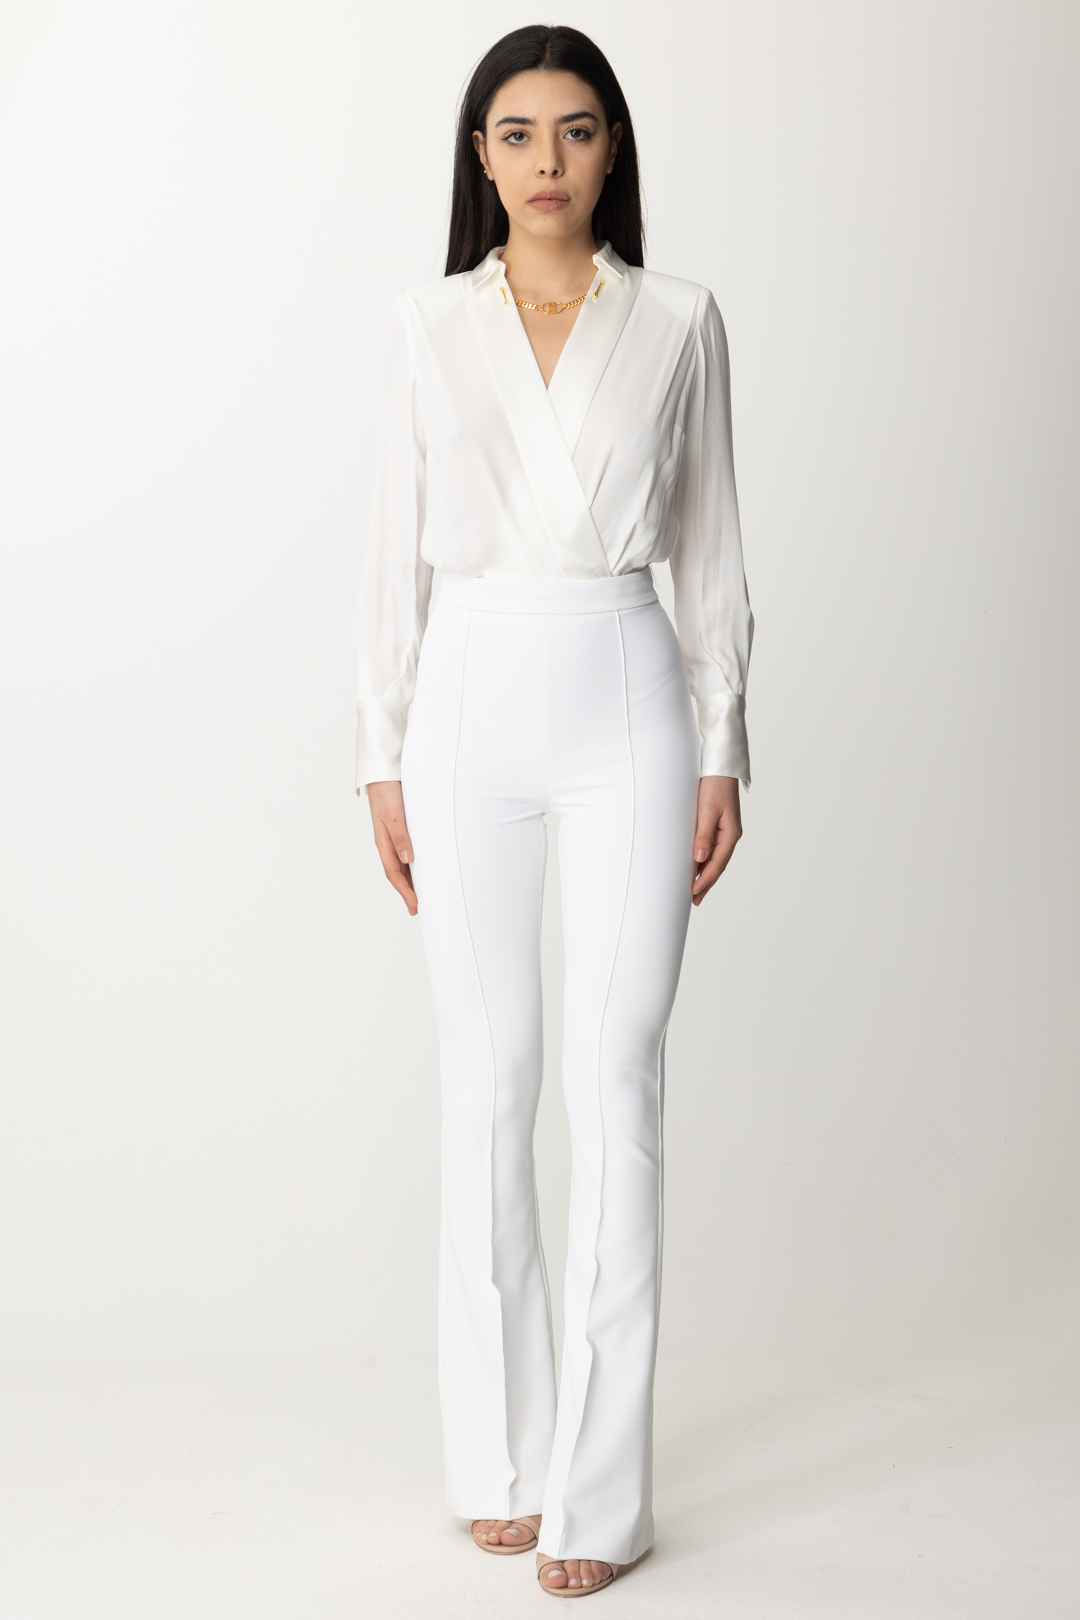 Preview: Elisabetta Franchi Combined Jumpsuit with Collar Accessory Avorio